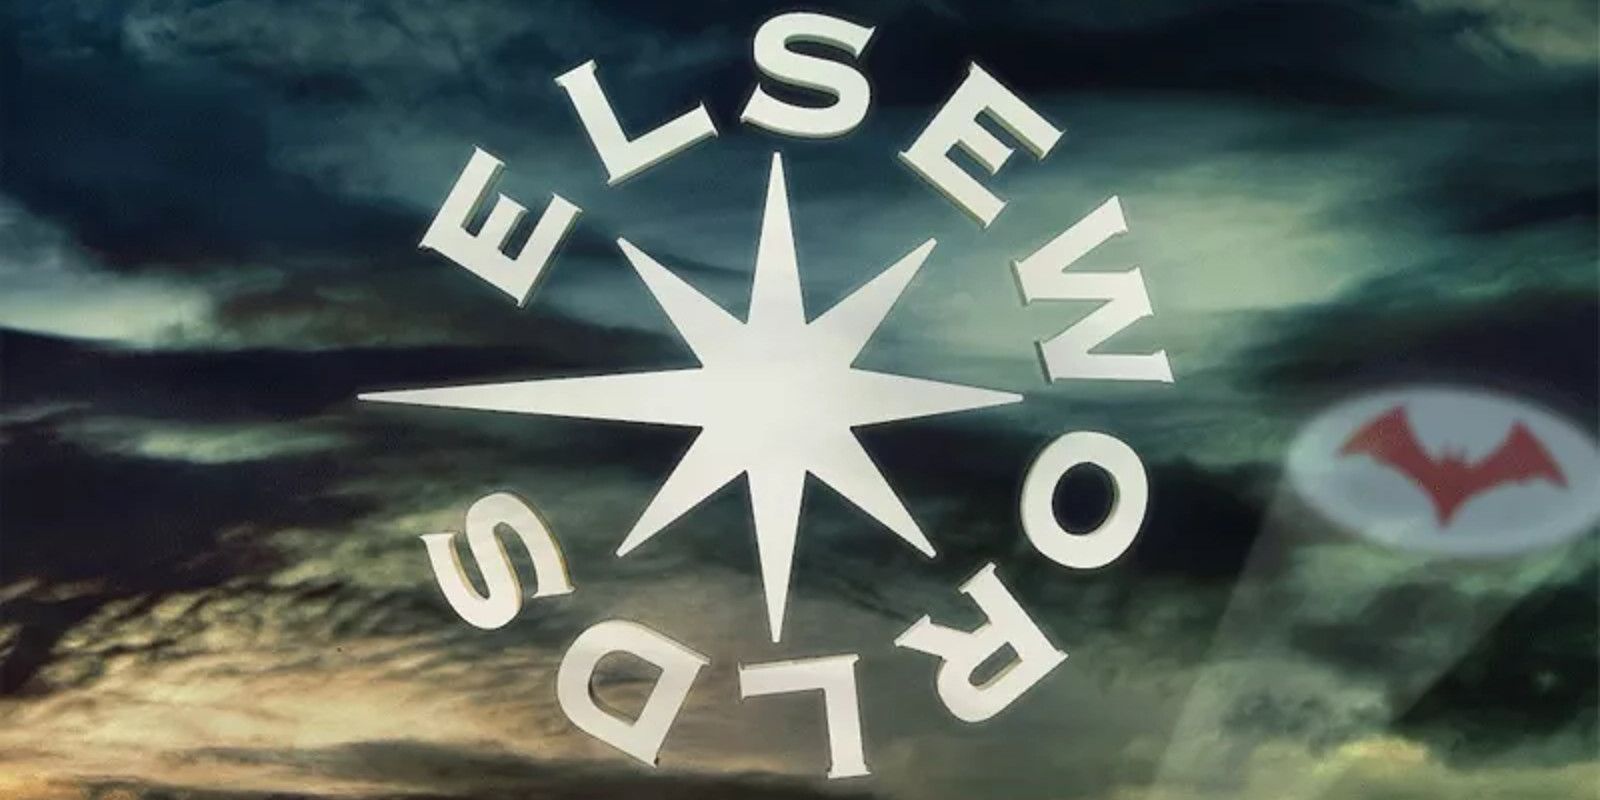 Elseworlds Every Easter Egg & Reference In The Arrowverse Crossover